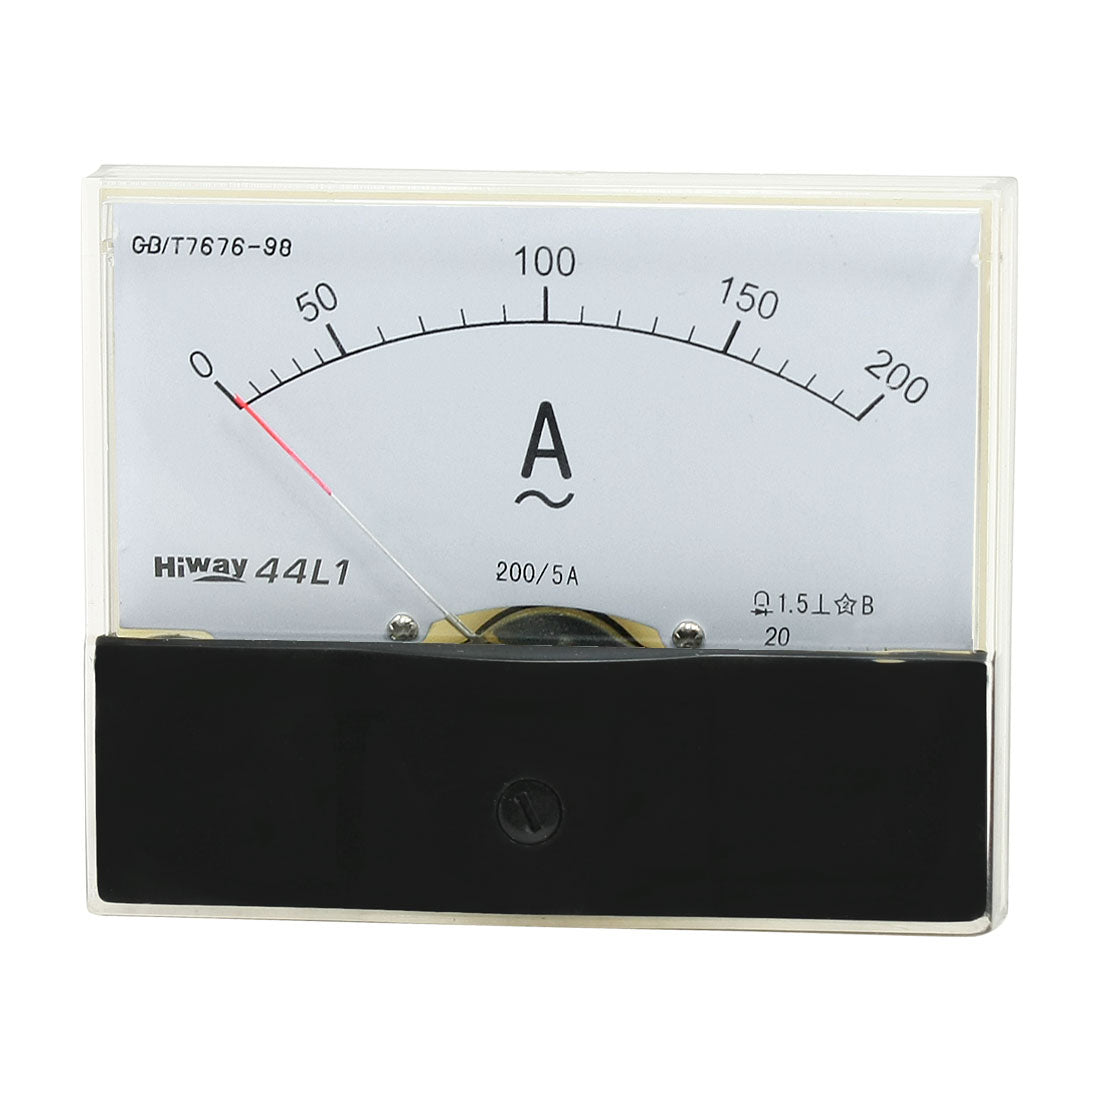 uxcell Uxcell Plastic Casing AC 0-200A Analog Panel Meter Ampere Ammeter Gauge 44L1